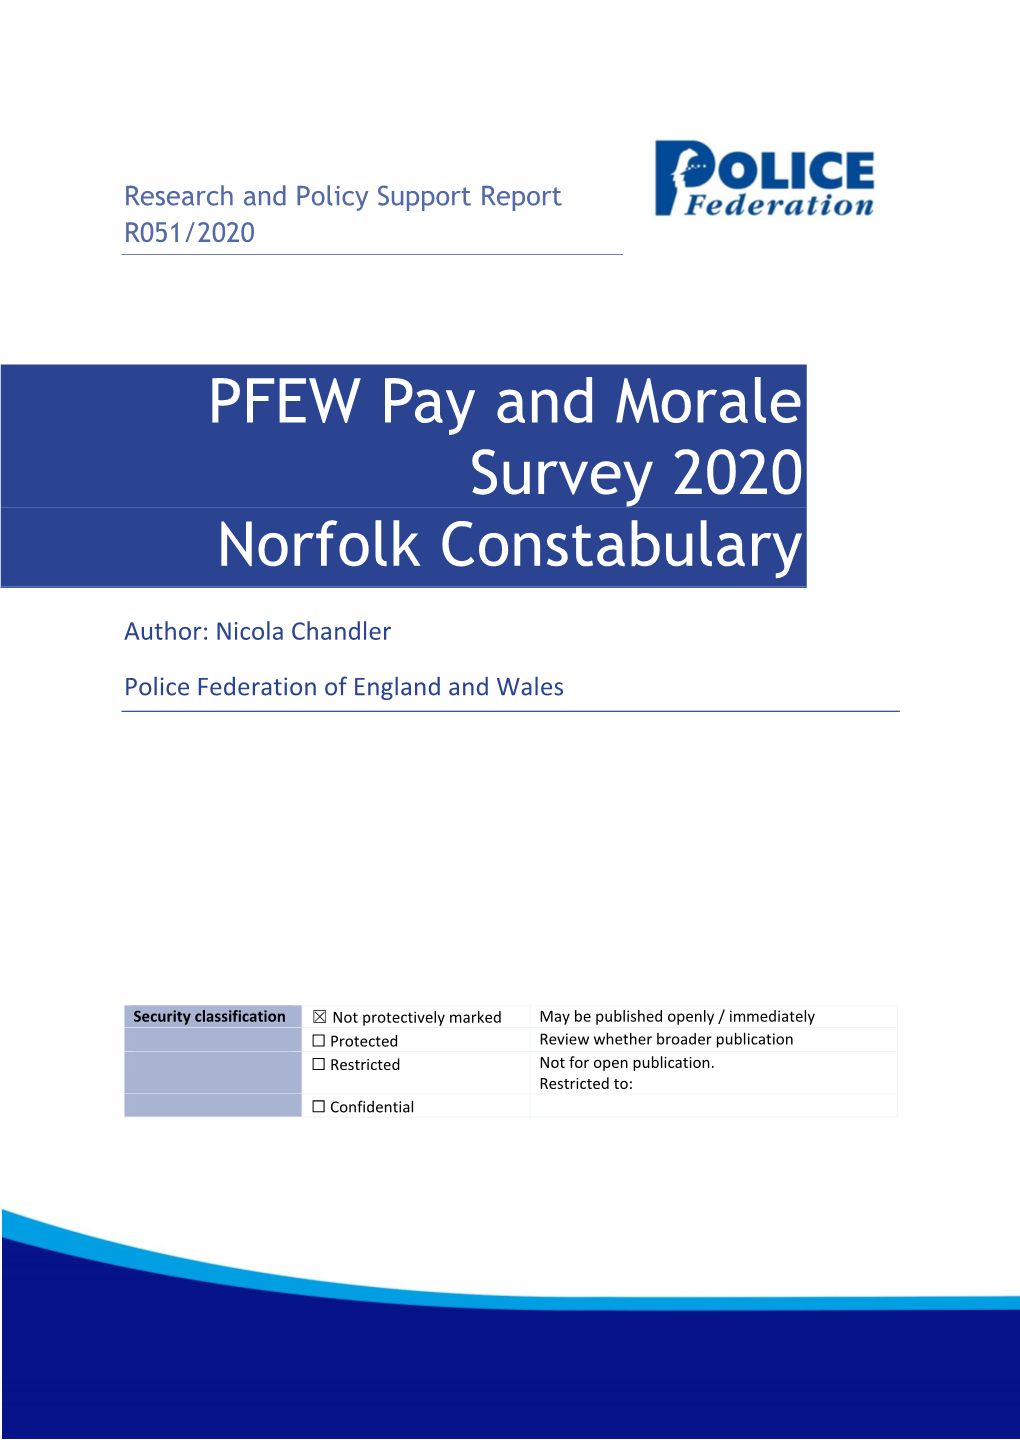 PFEW Pay and Morale Survey 2020 Norfolk Constabulary